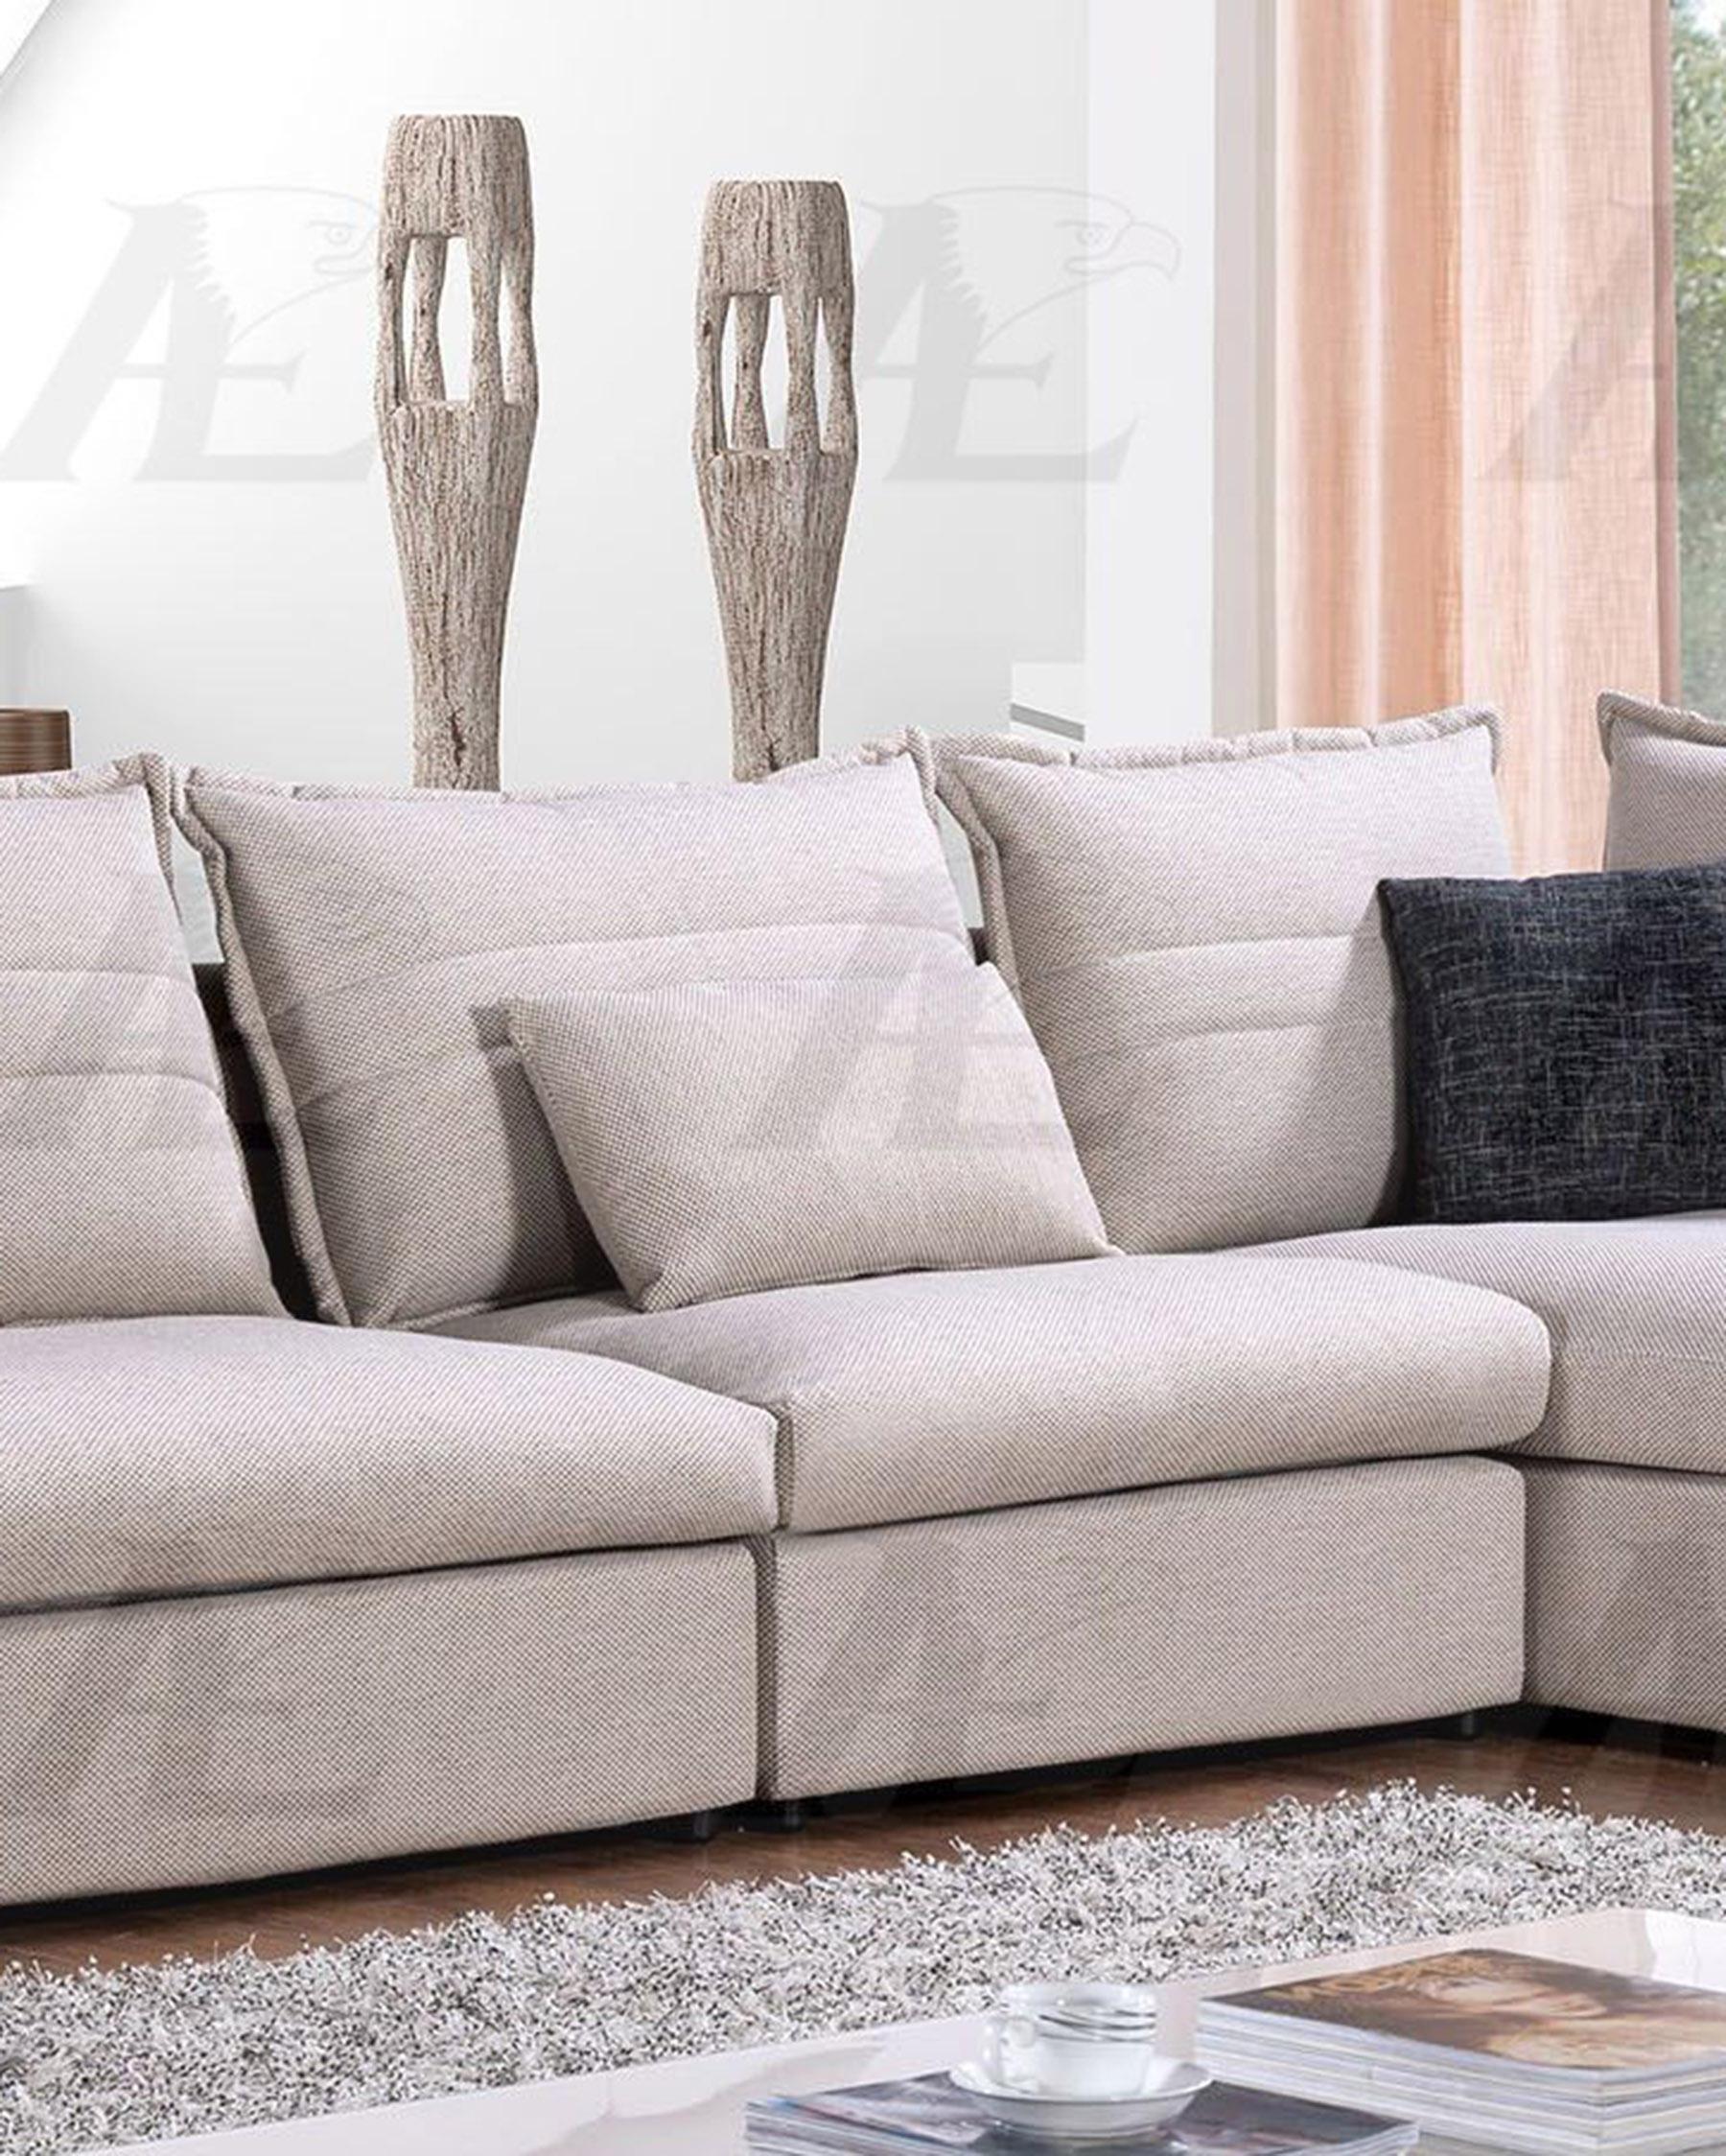 

    
AE-L2319 Set-3 RHC American Eagle Furniture AE-L2319 Gray Fabric Tufted Sectional Sofa Chaise and Chair Set Right Hand Chase 3Pcs
